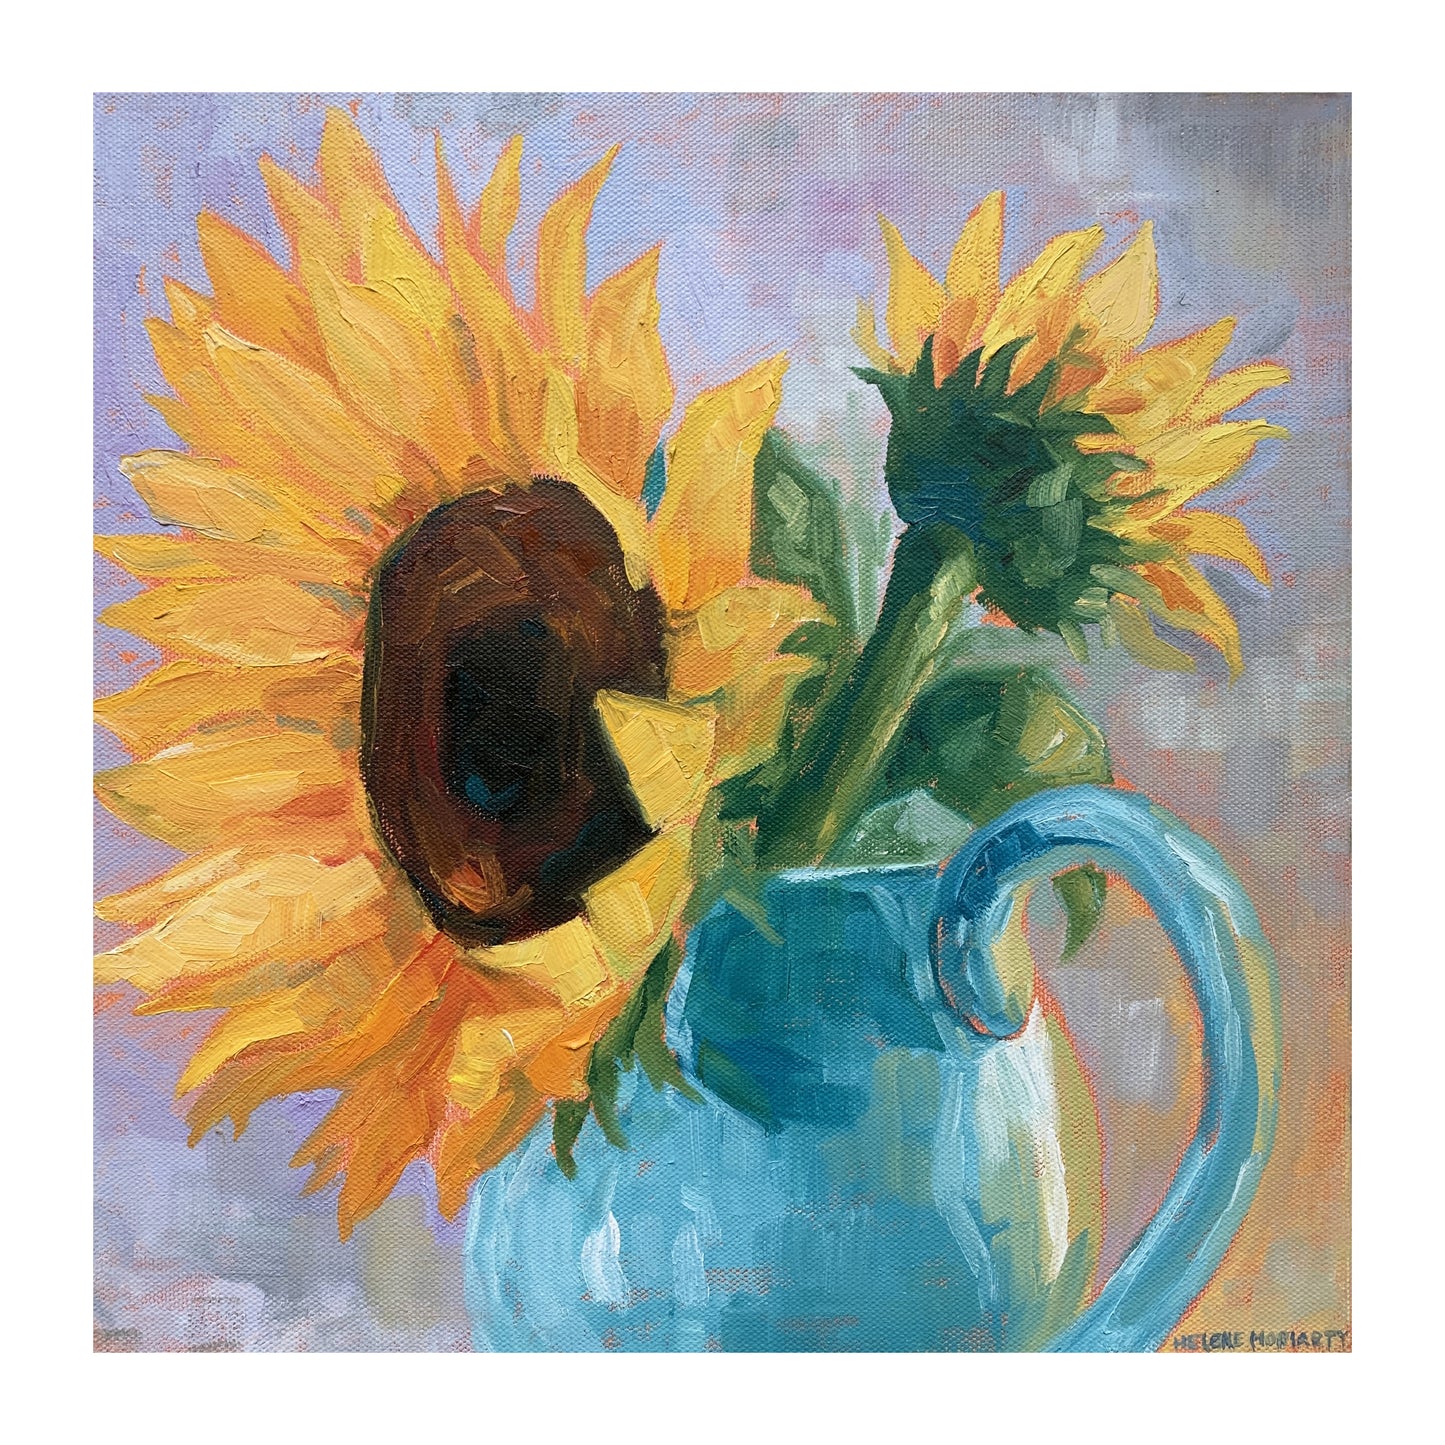 'Sunflowers': Fine Giclee Art Print from Original Oil Painting